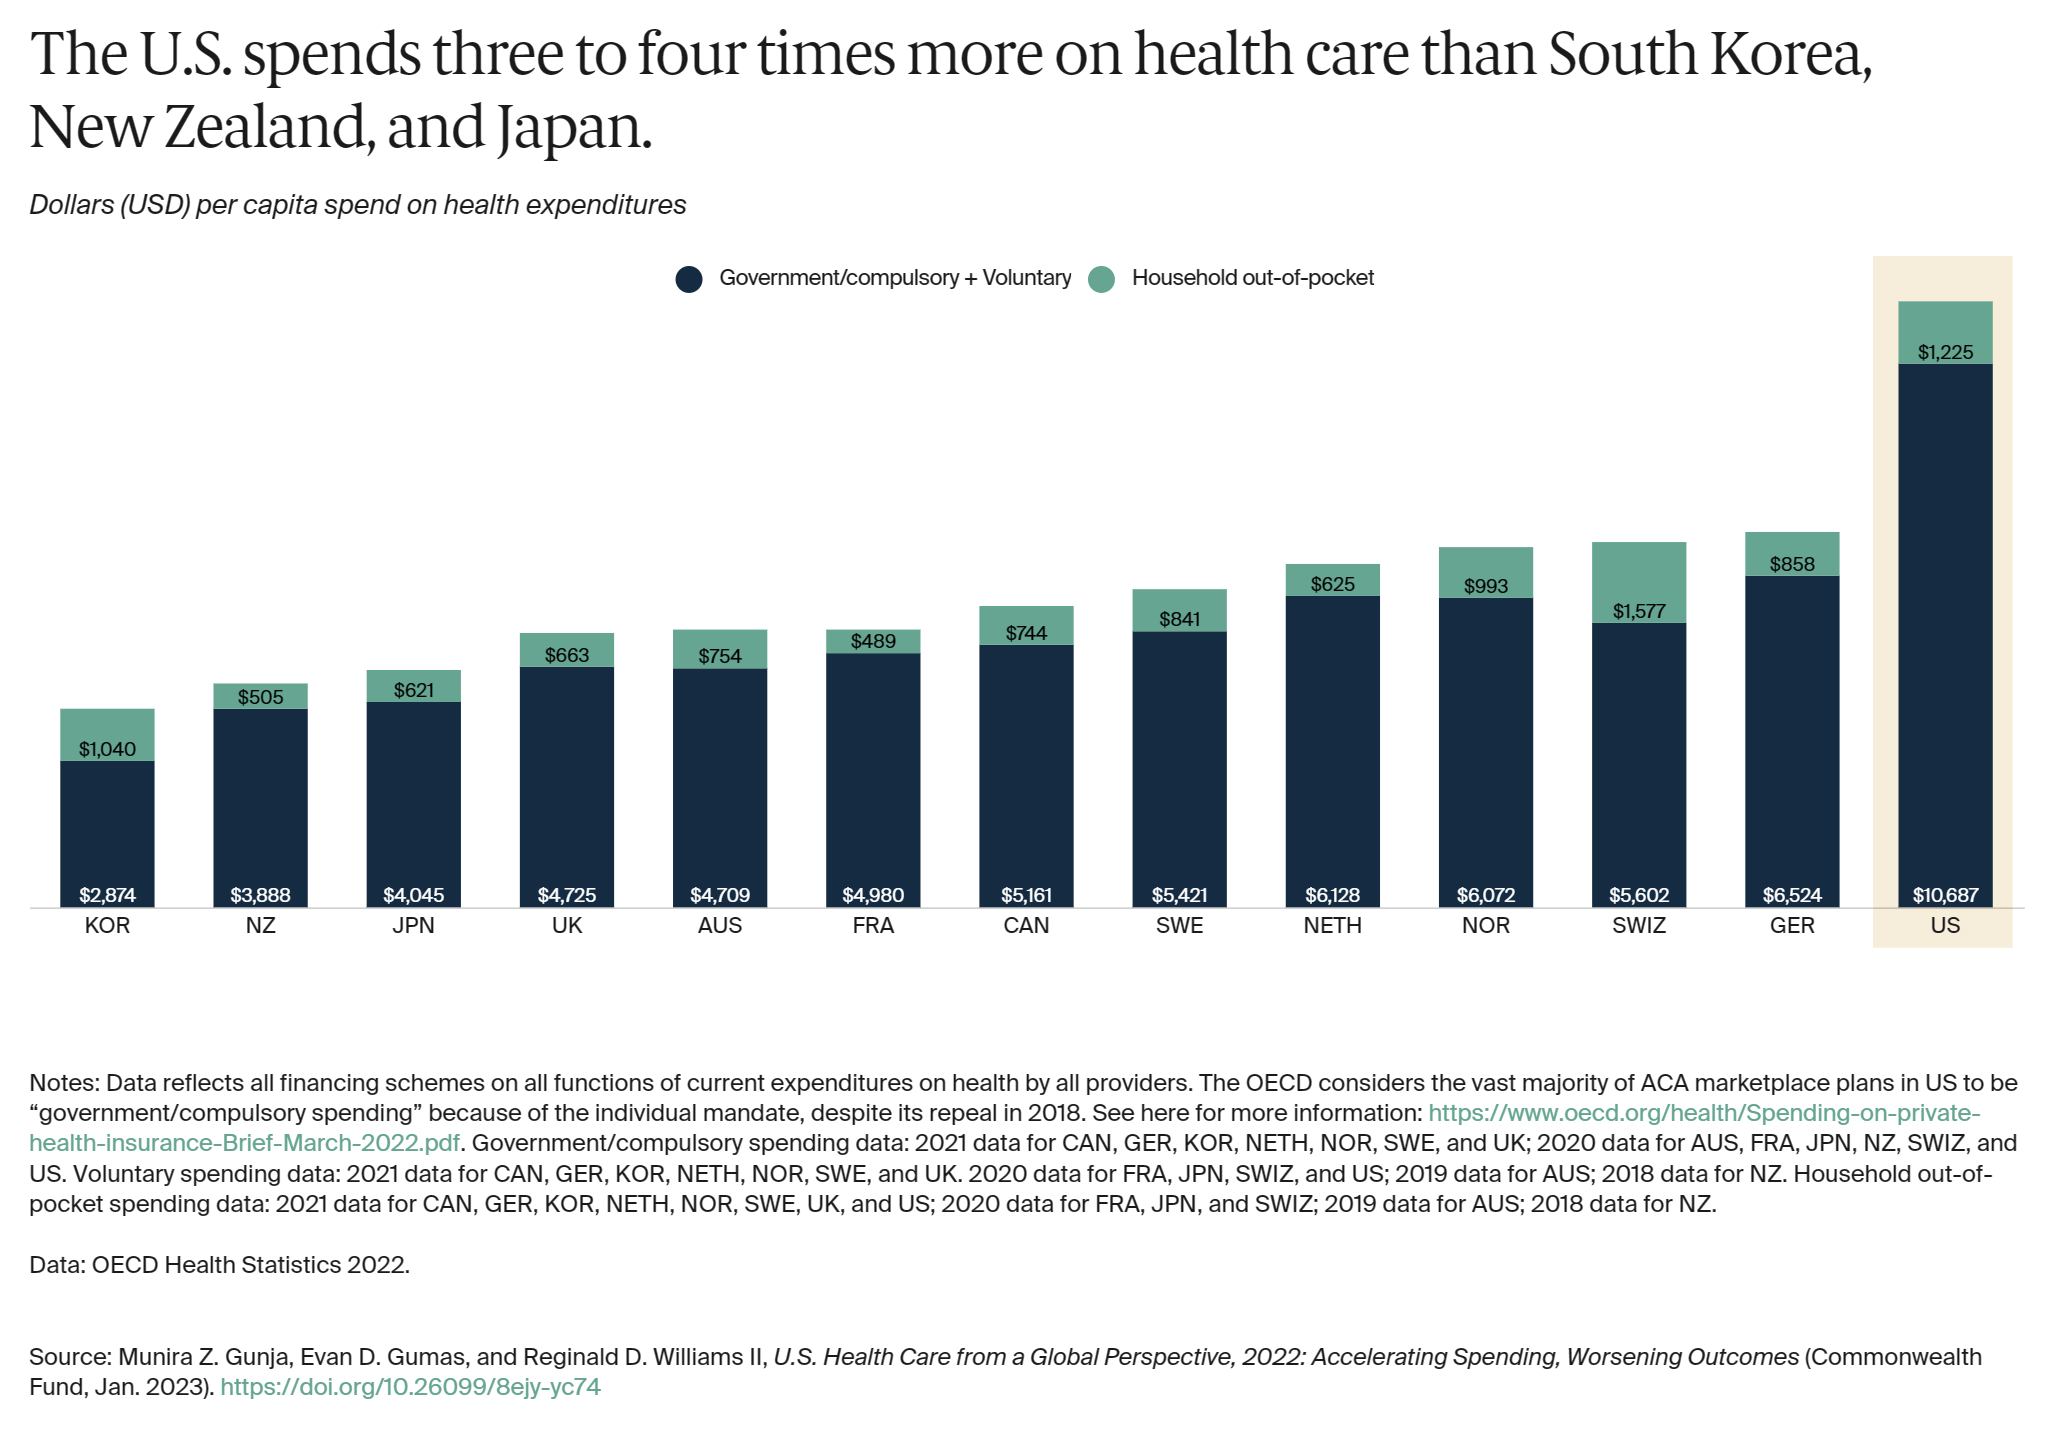 Dollars (USD) per capita spend on health expenditures in OECD nations, 2021. The U.S. spends three to four times more on health care than South Korea, New Zealand, and Japan. Graphic: The Commonwealth Fund